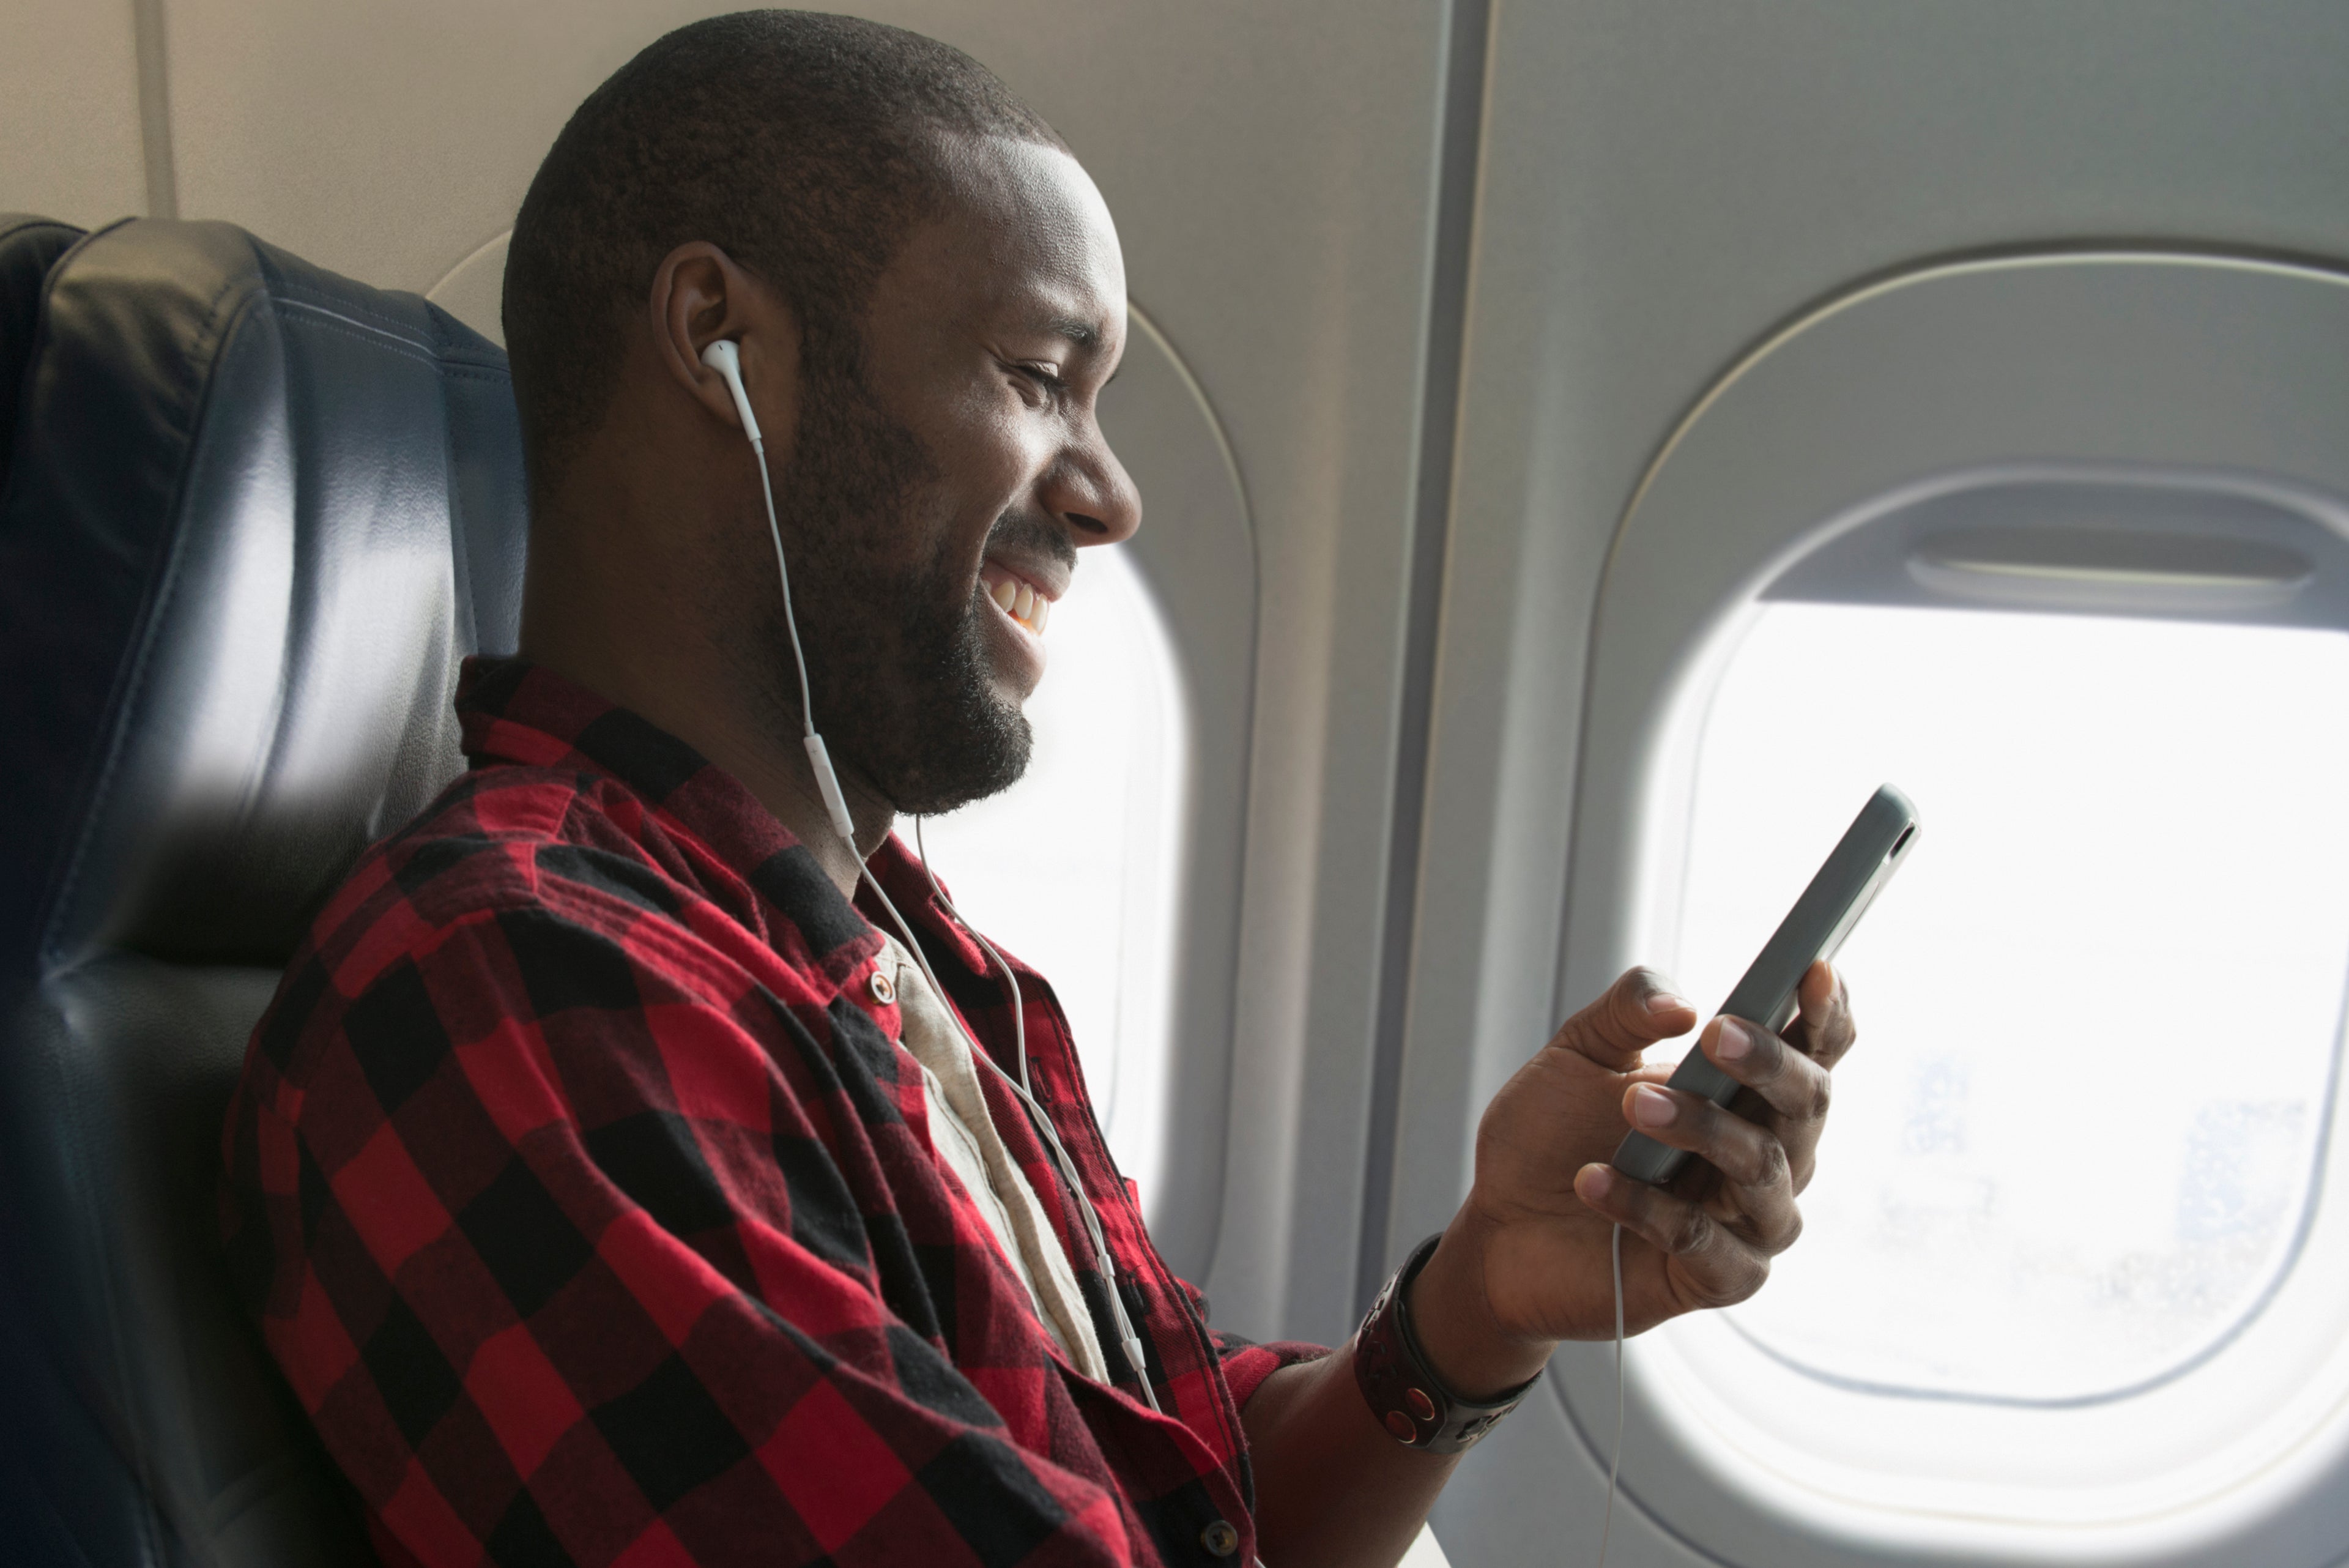 Black man listening to earbuds on airplane